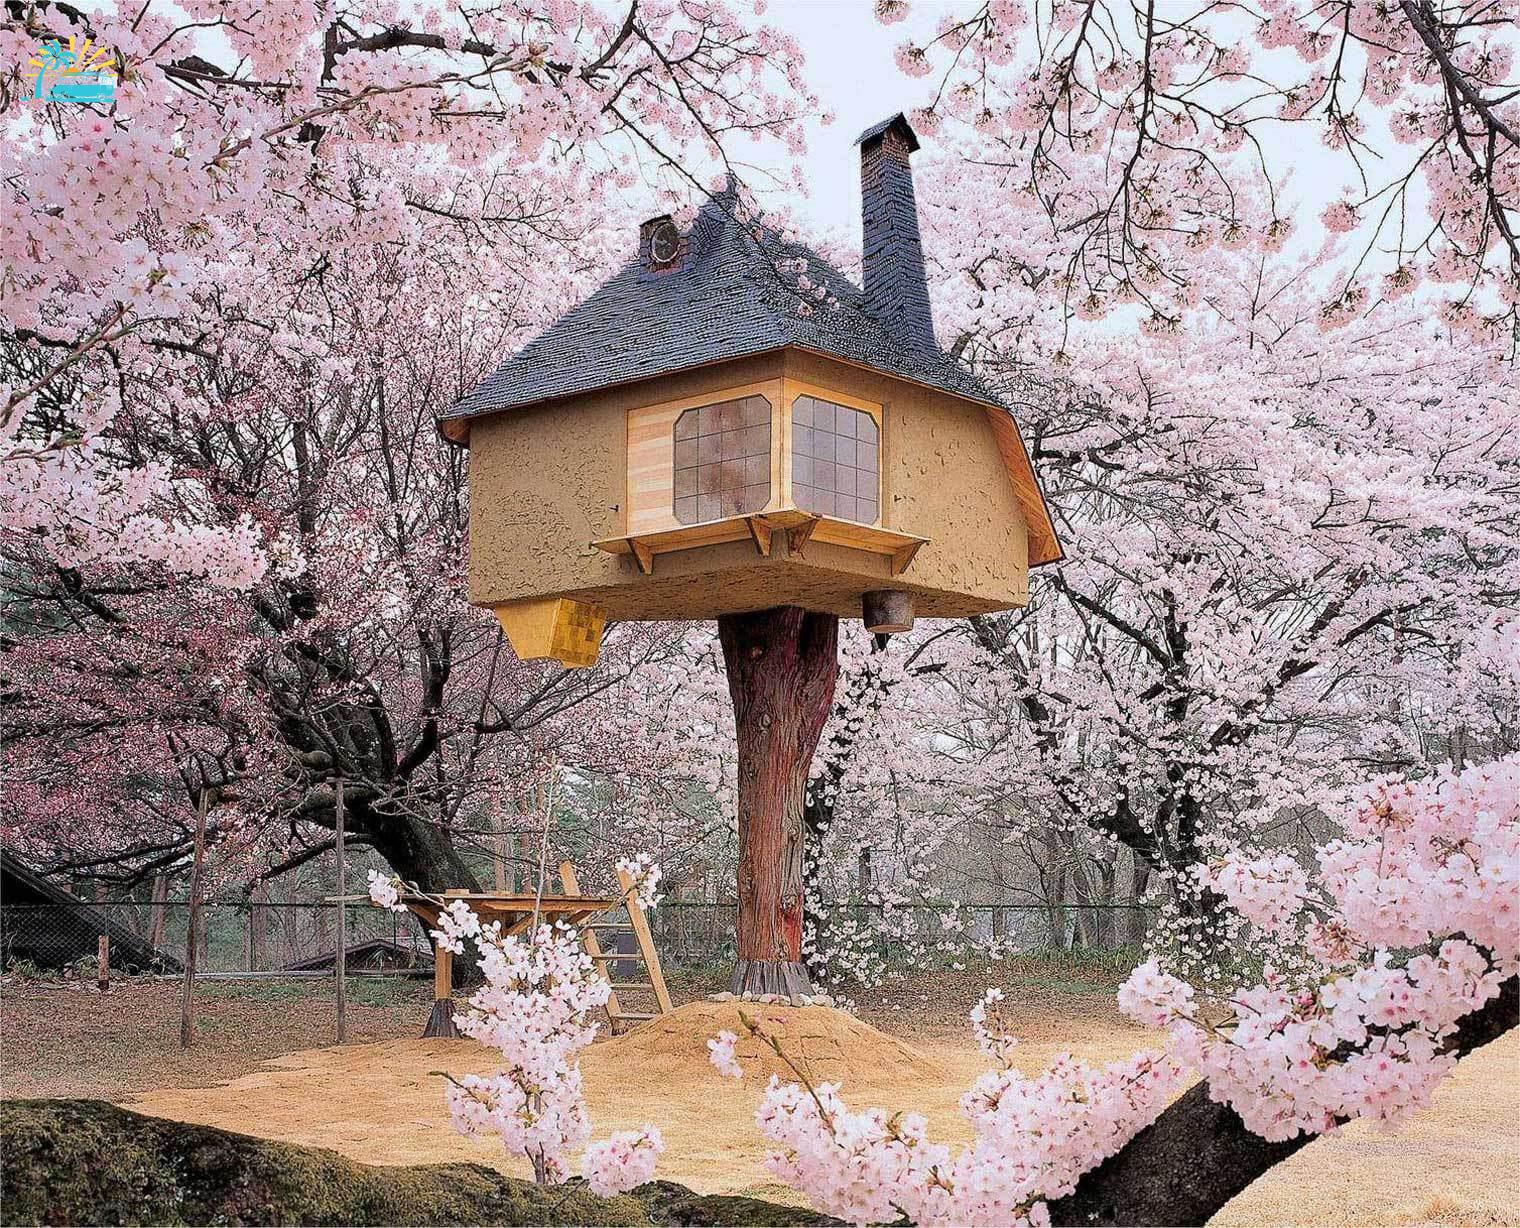 A view of Tetsu treehouse in Japan surrounded by cherry blossom